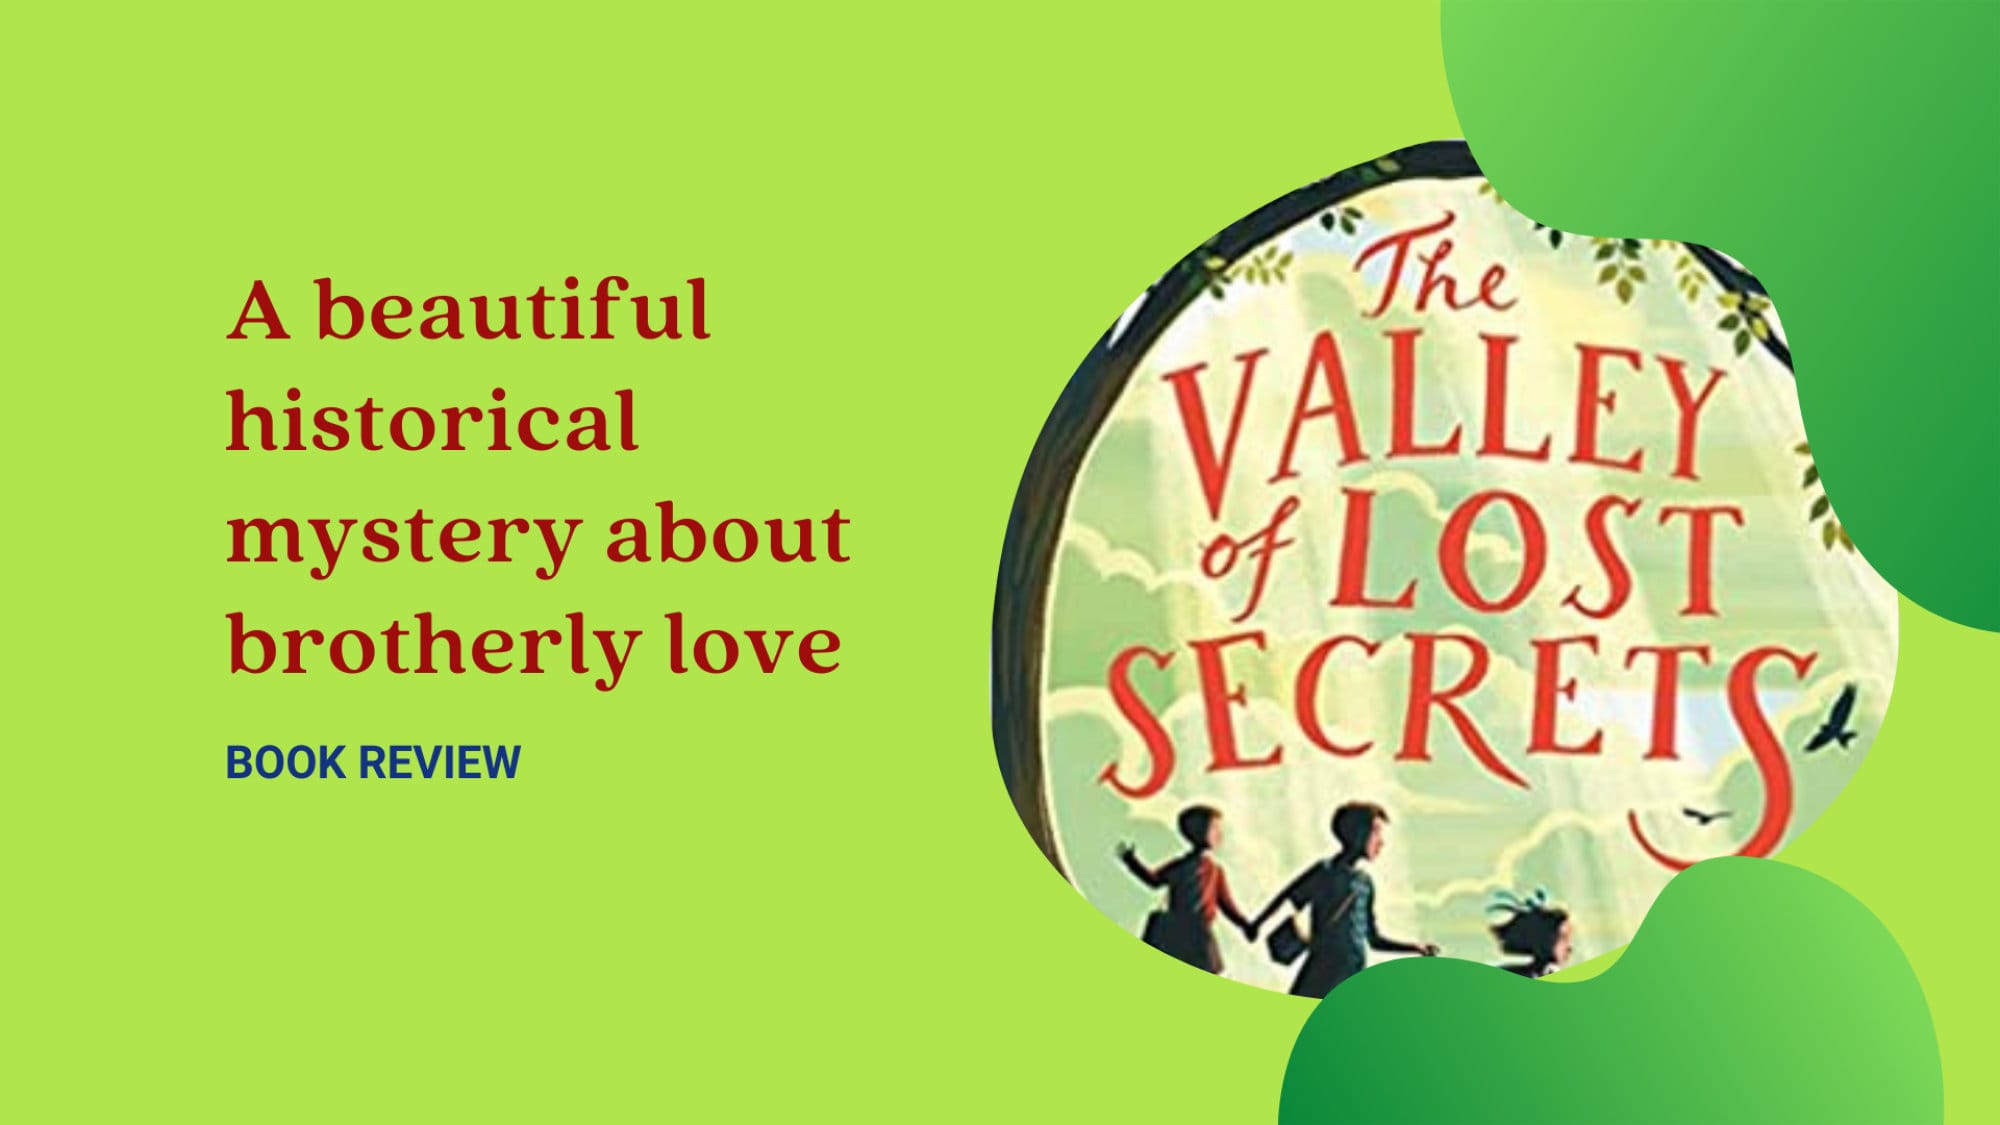 The Valley of Lost Secrets - Book Review